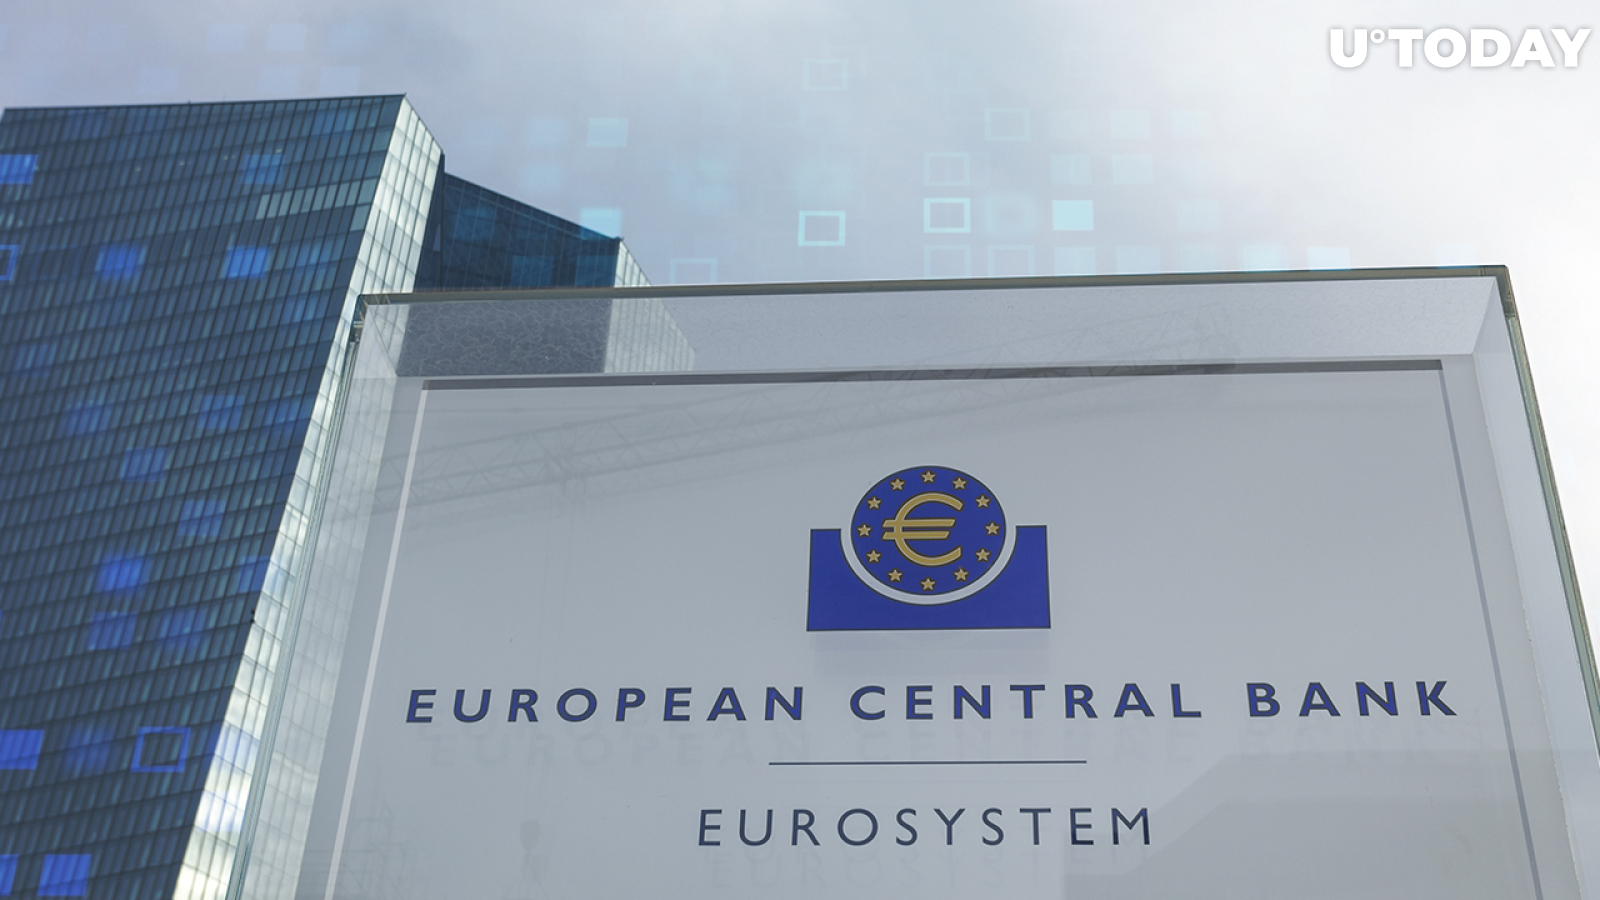 European Central Bank Releases Warning About Bitcoin and Cryptocurrencies